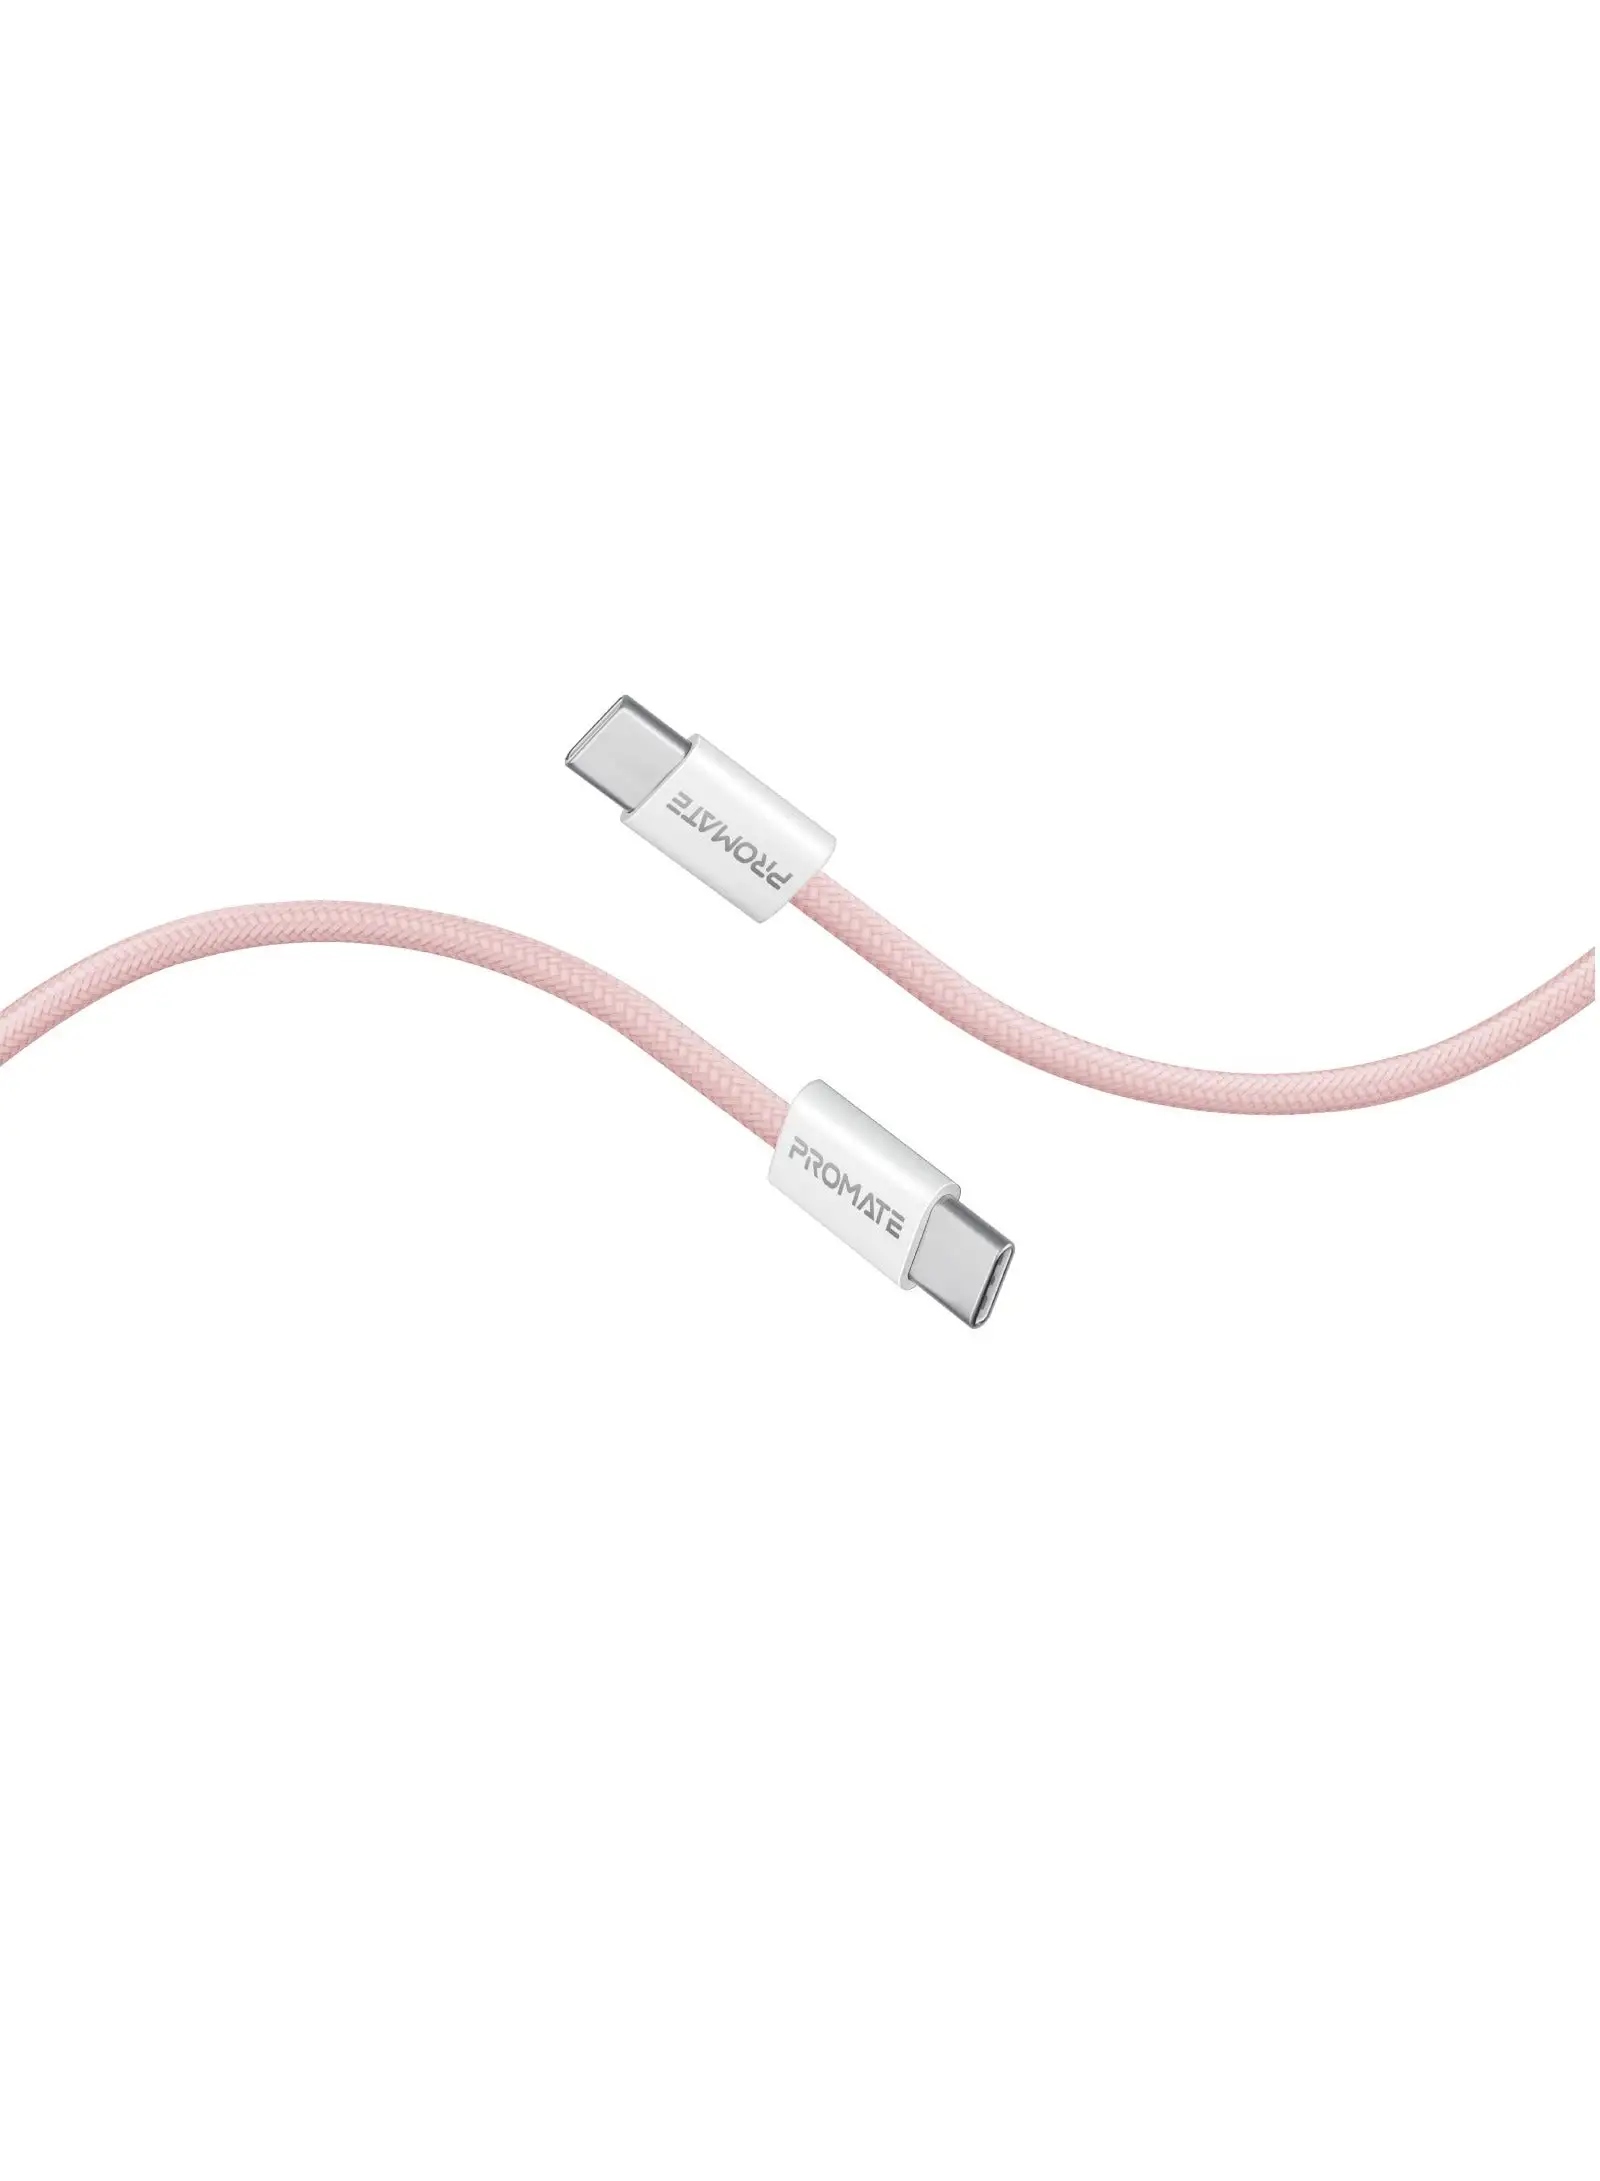 PROMATE USB-C Charging Cable, Powerful Sync Charge Type-C Cable with 60W Fast Power Delivery, 480Mbps Data Transfer and 120cm Tangle-Free Nylon Braided Cord, EcoLine-CC120 Pink